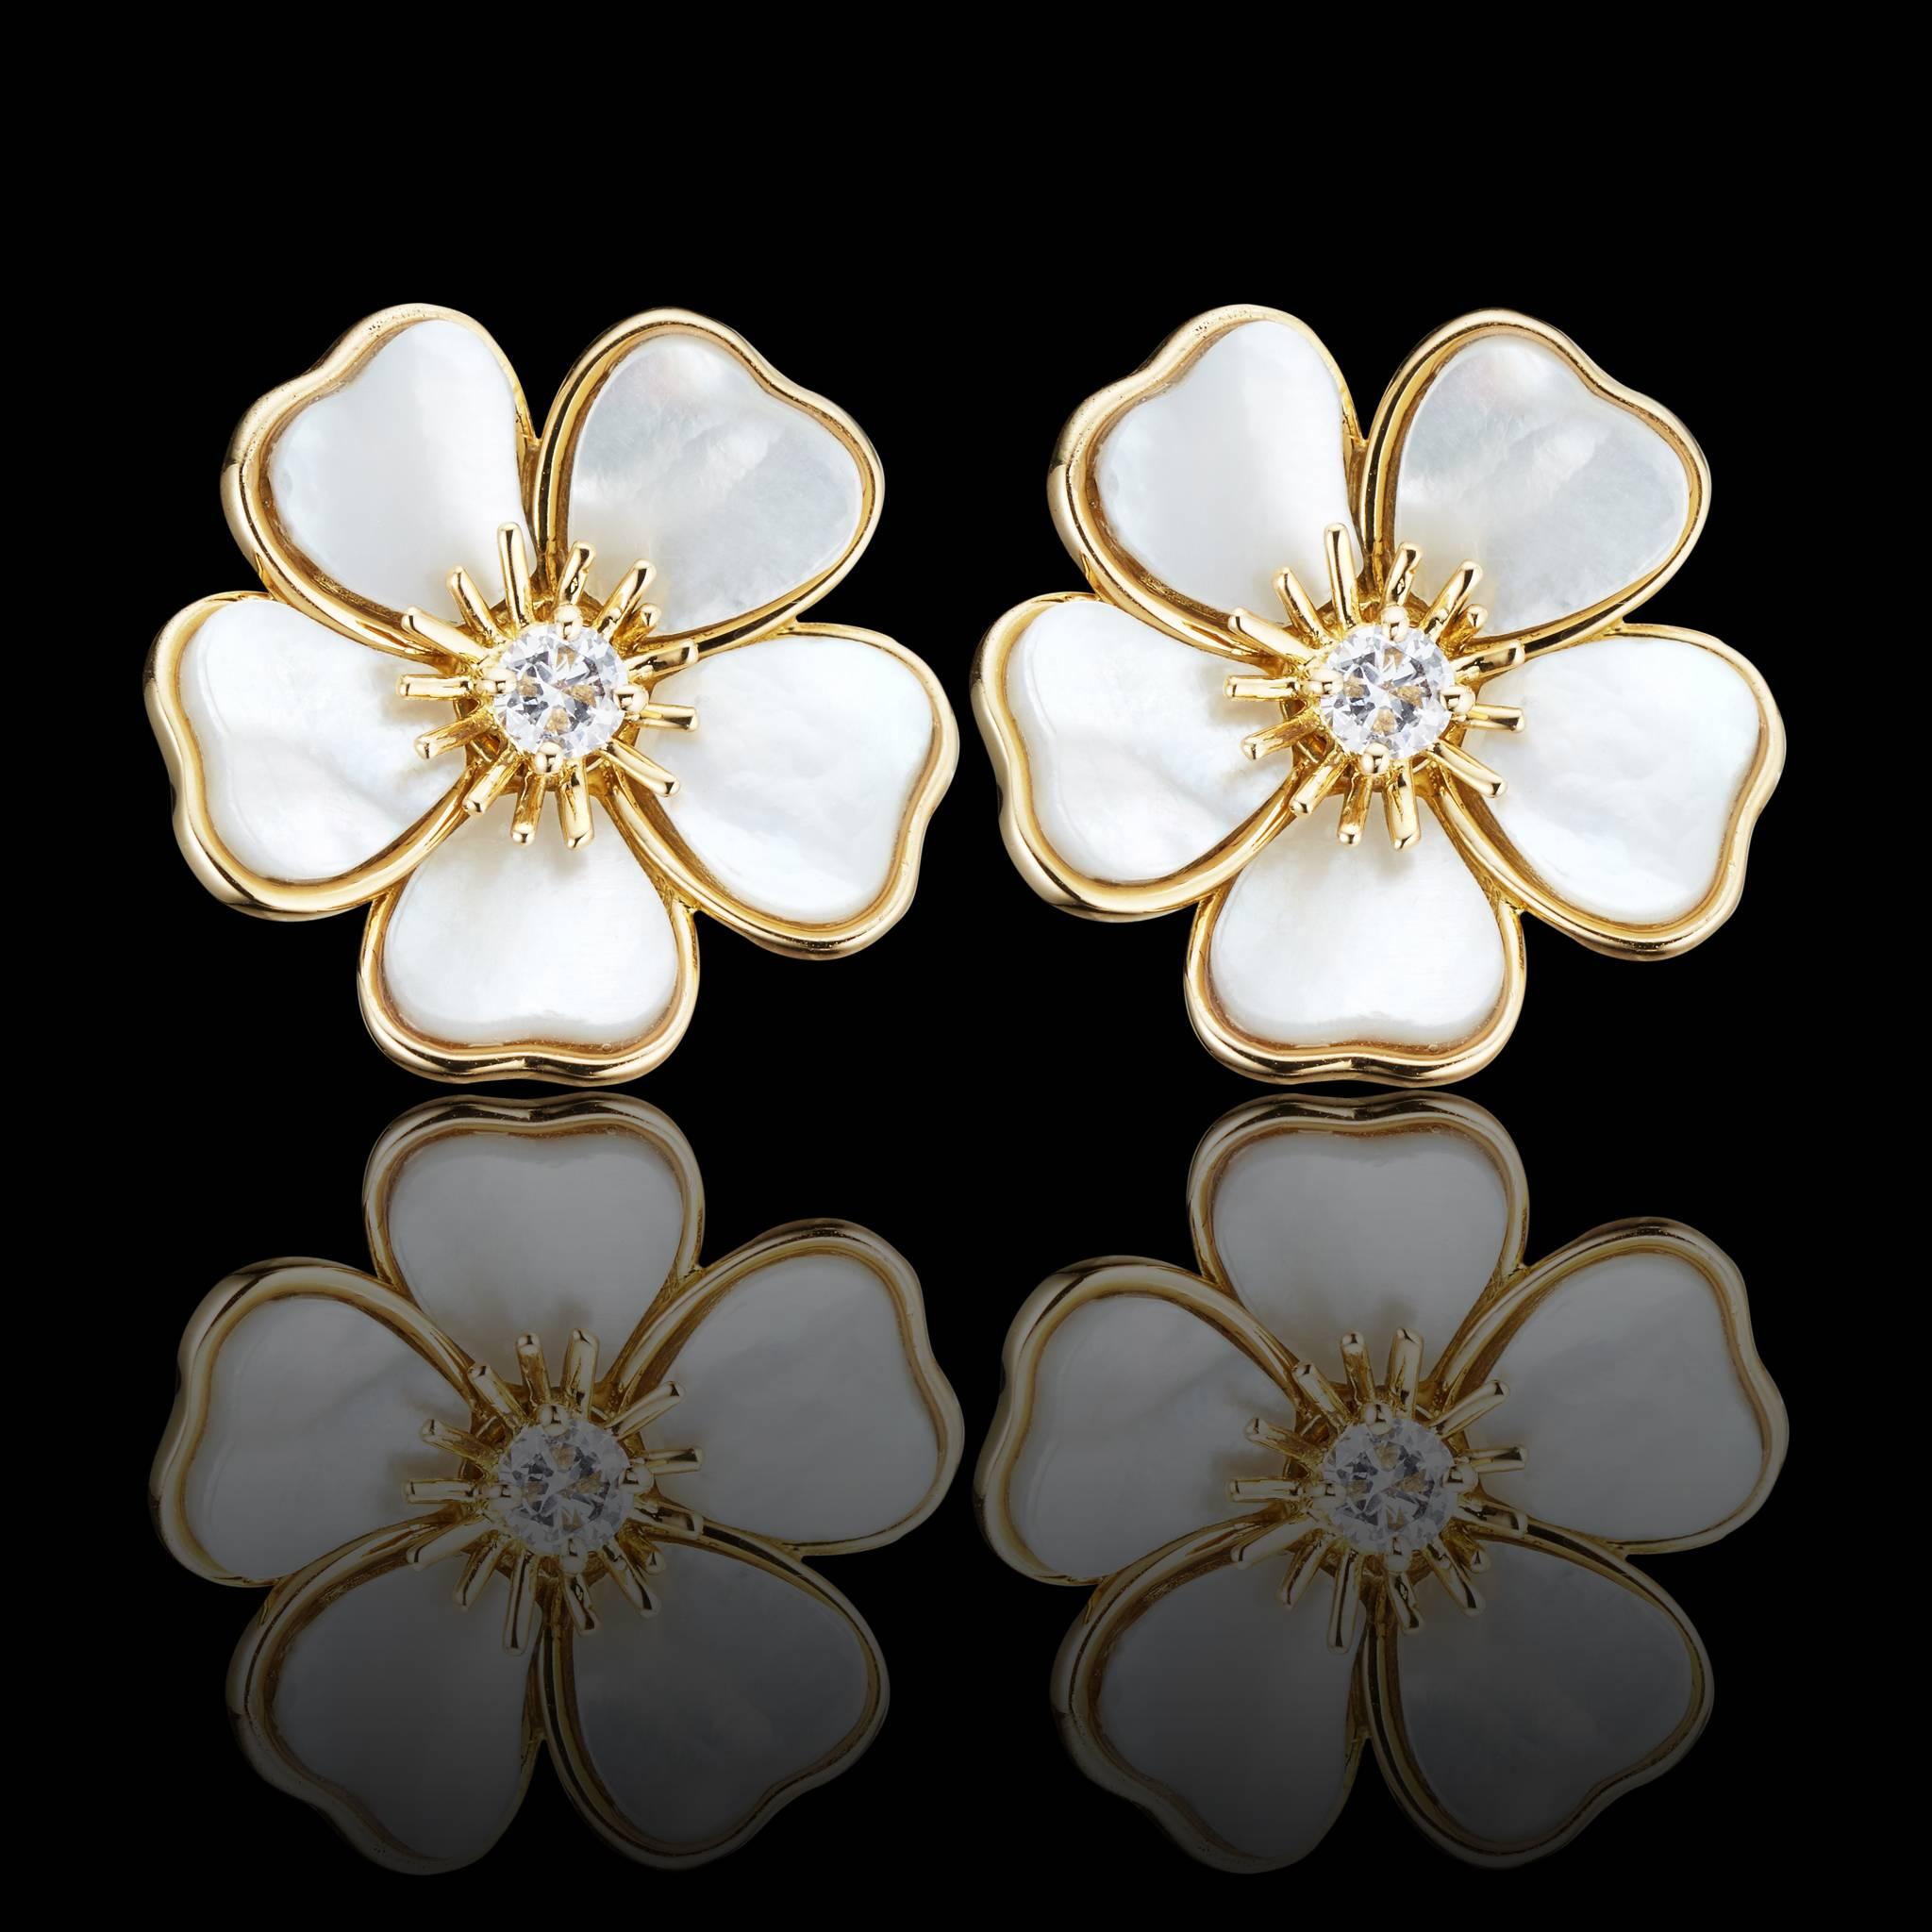 -Van Cleef & Arpels flowers earrings feature mother of pearl petals in 18k yellow gold. Central to the flowers are their diamond centers. 
-The two diamonds weigh :App 0.26 carats total.
-Signed:VCA.
-Numbered:0815244.
-Ear clip pierced